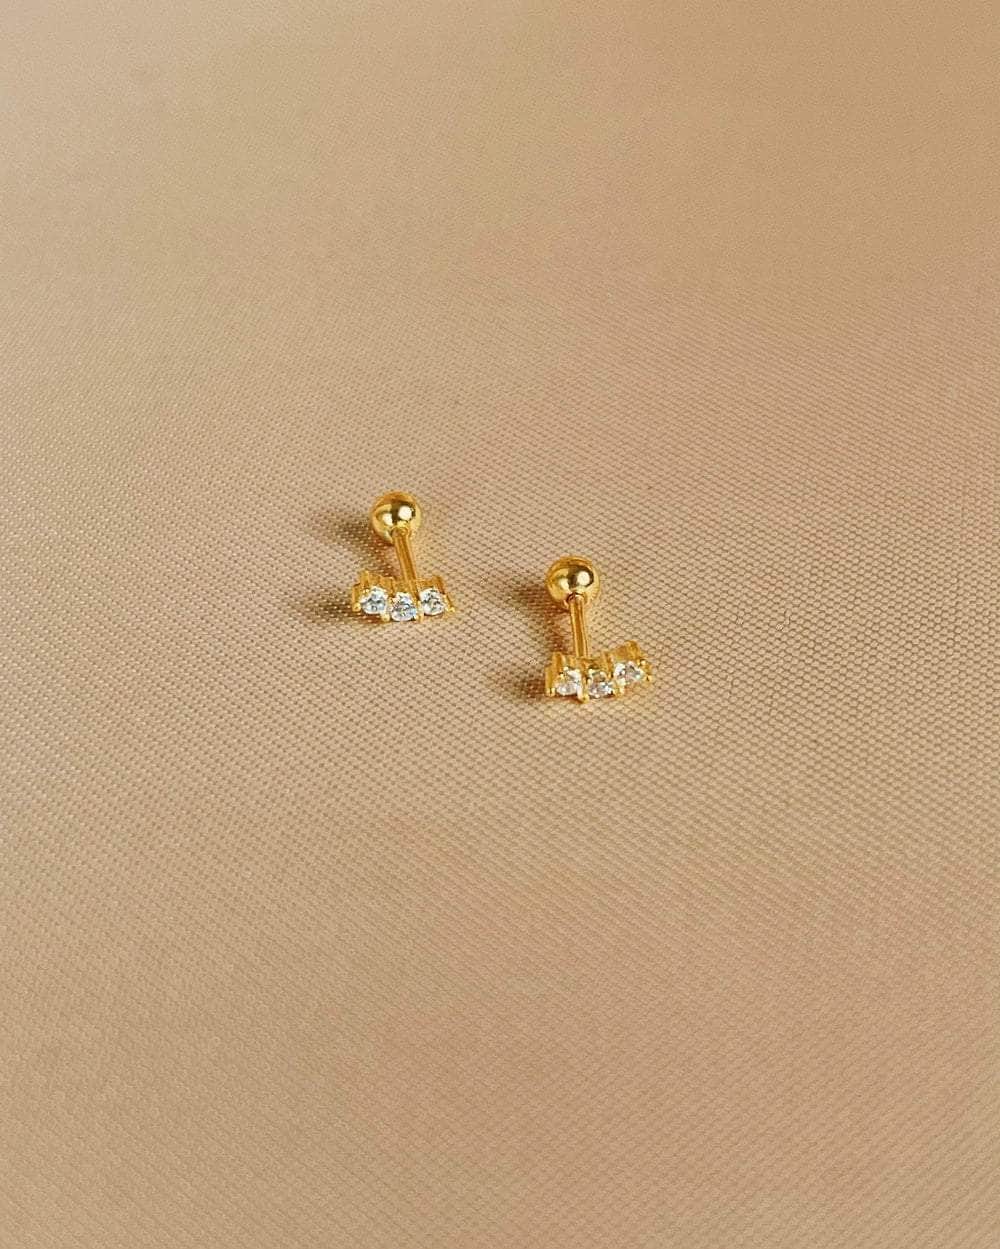 So Dainty Co. Studs Haven Gold Studs Gold Plated 925 Sterling Silver Jewelry